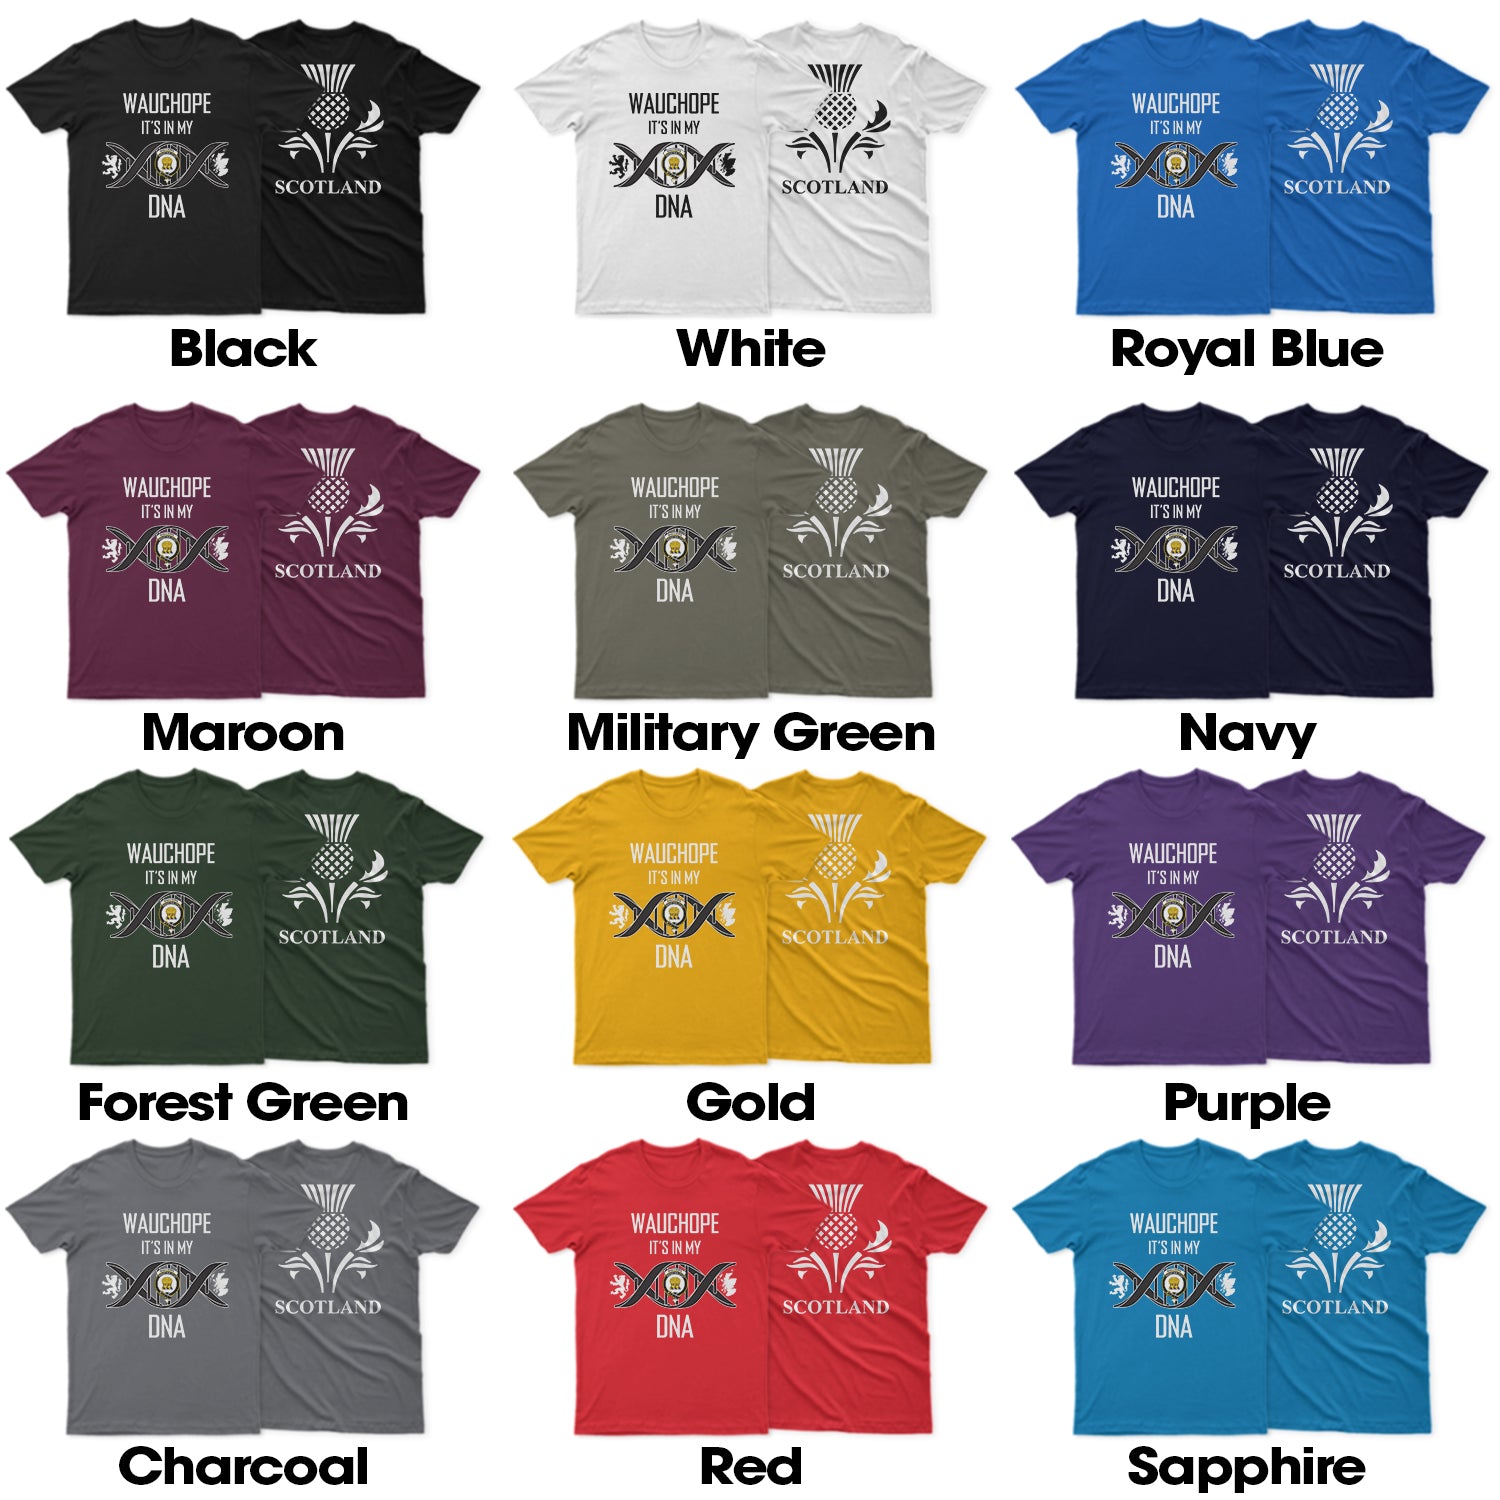 wauchope-family-crest-dna-in-me-mens-t-shirt